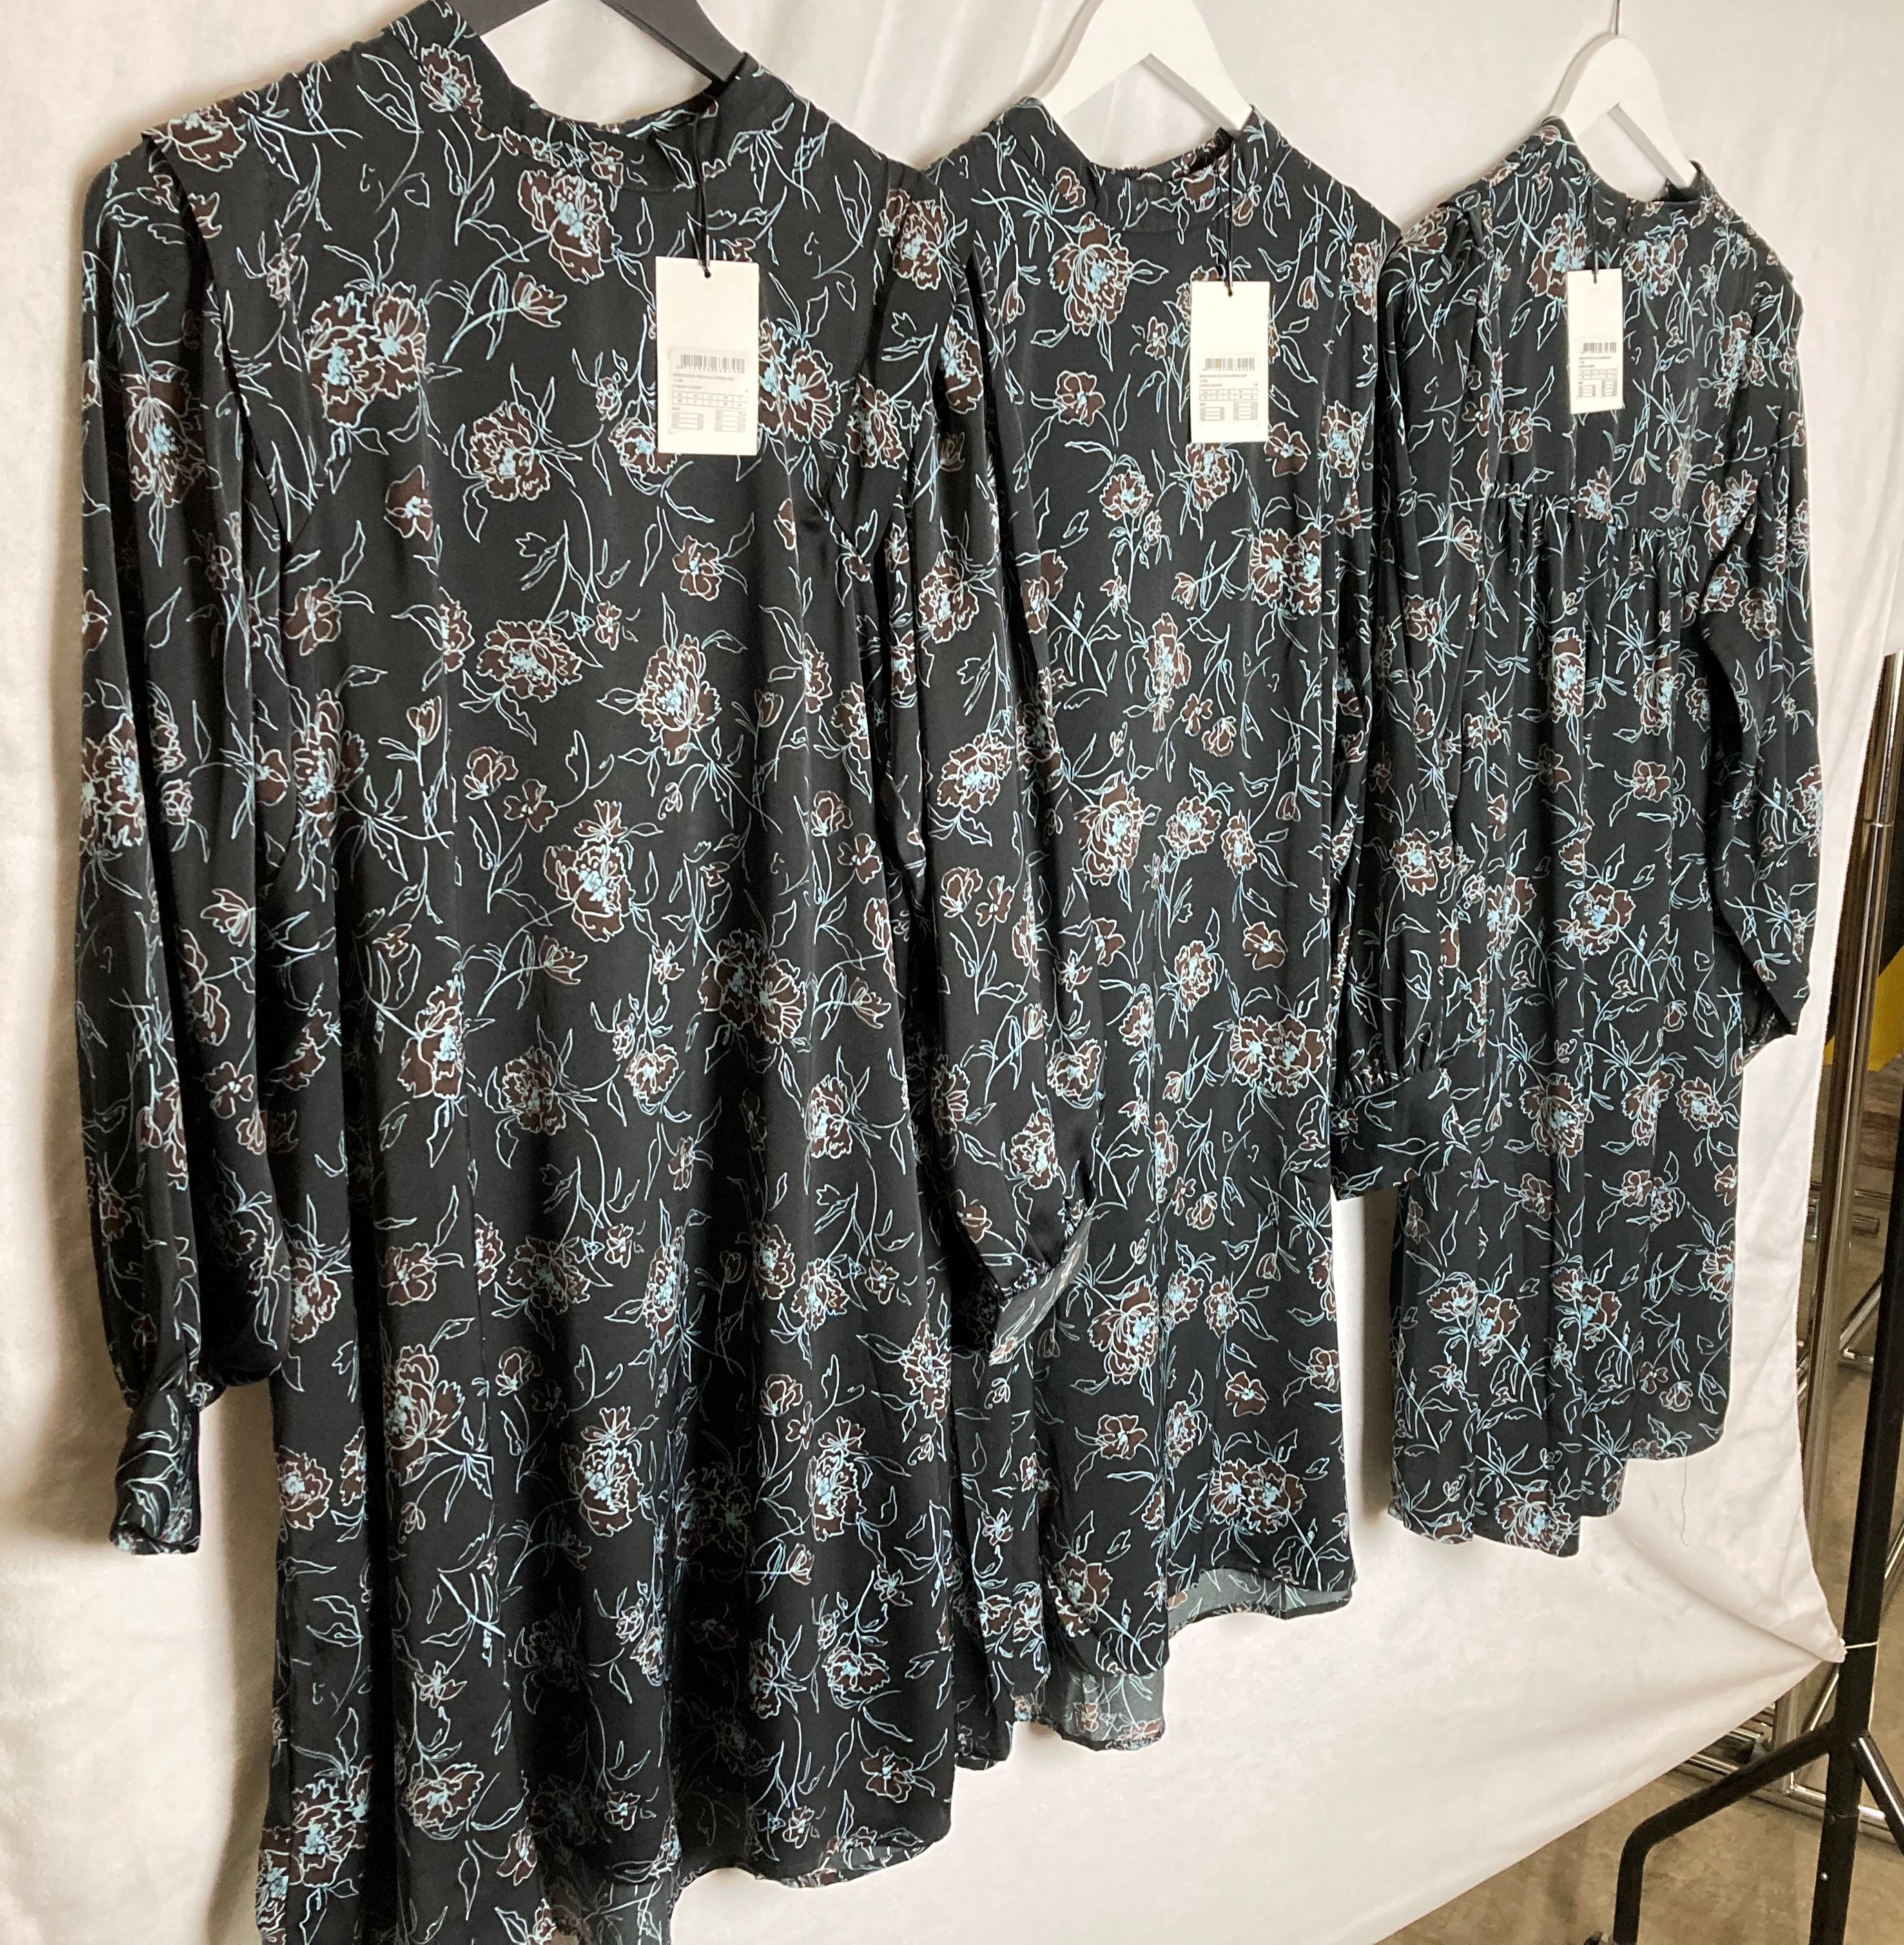 3 x MSCH ladies flower pattern dresses in black sizes XS and S UK 6 and 8 - RRP: £79.